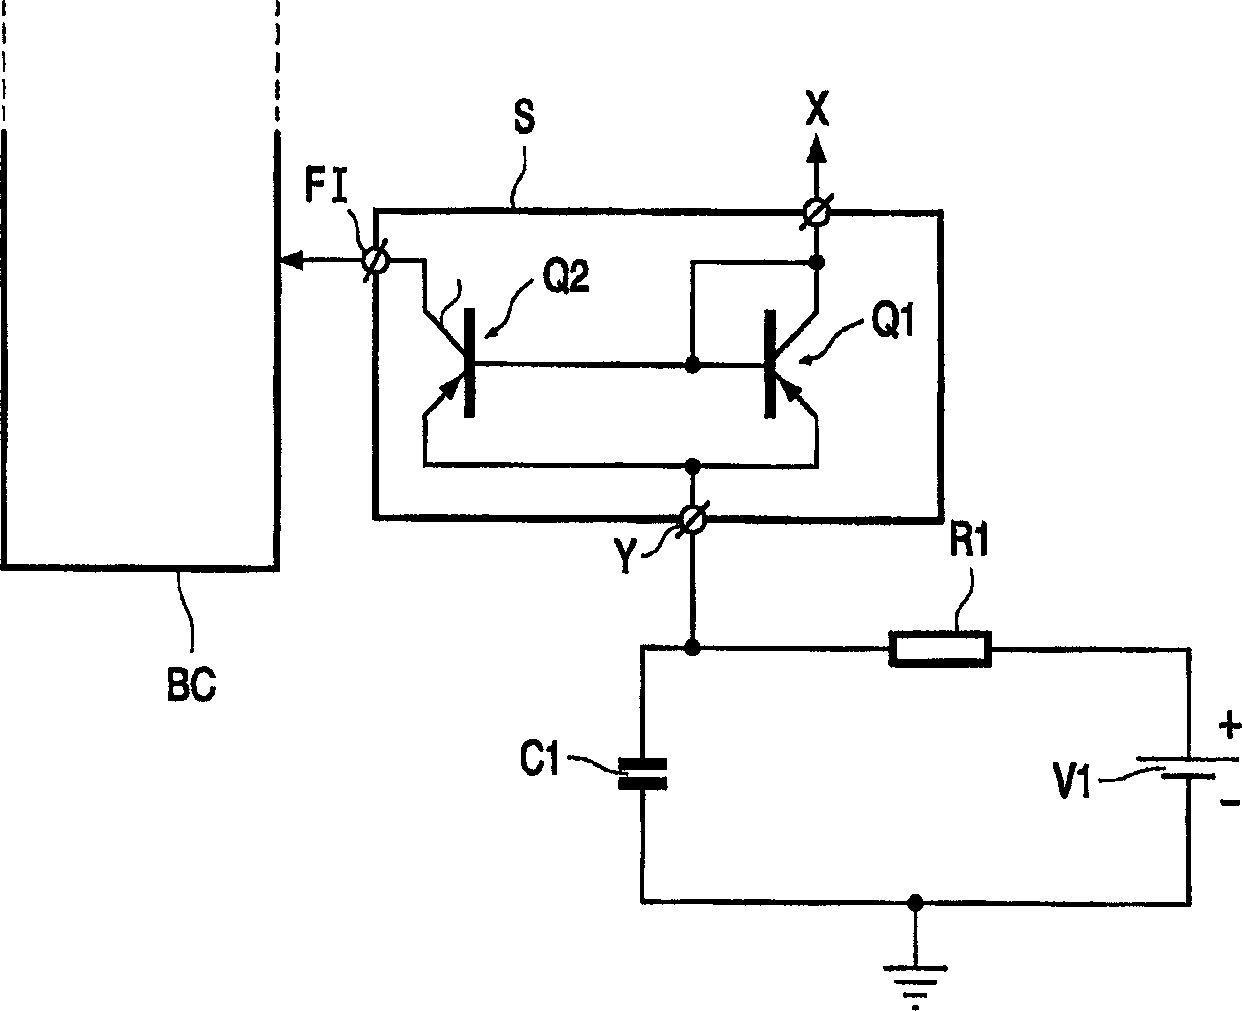 Display device comprising a cathode ray tube